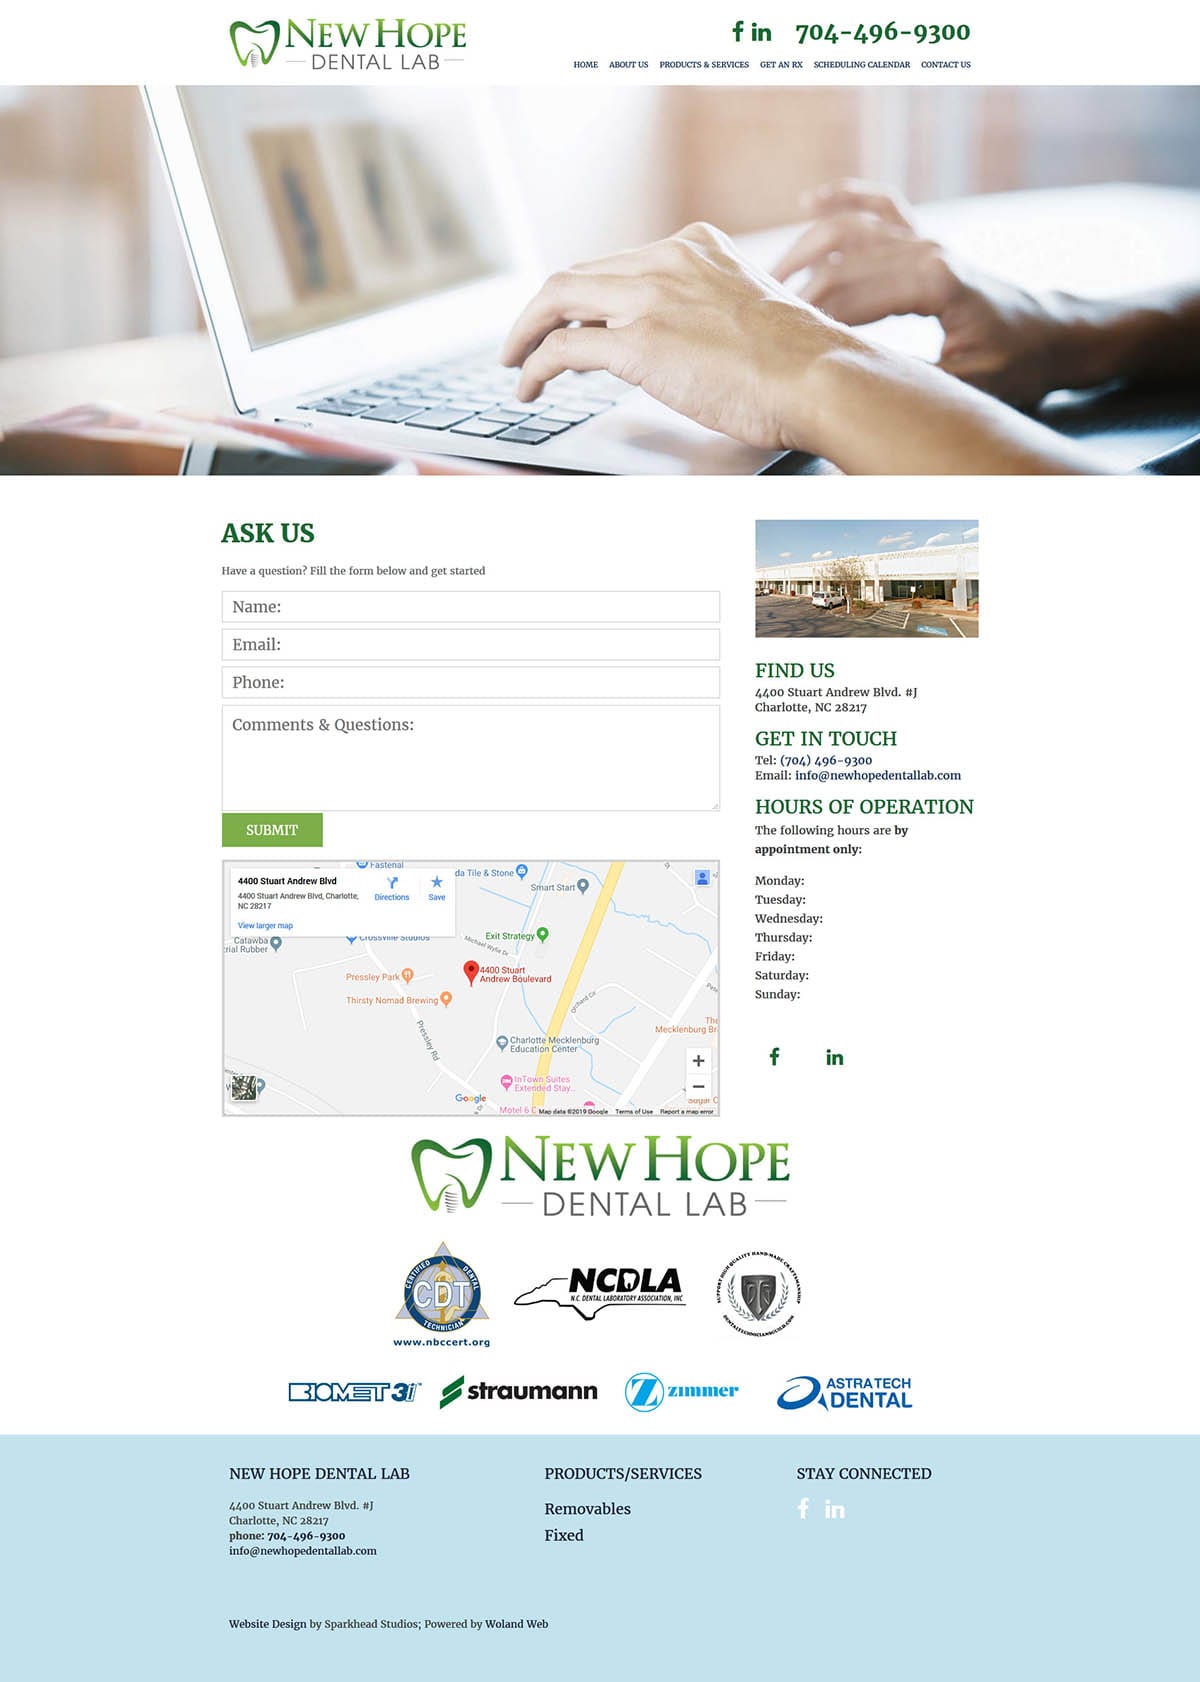 New Hope Dental Lab website contact page screenshot